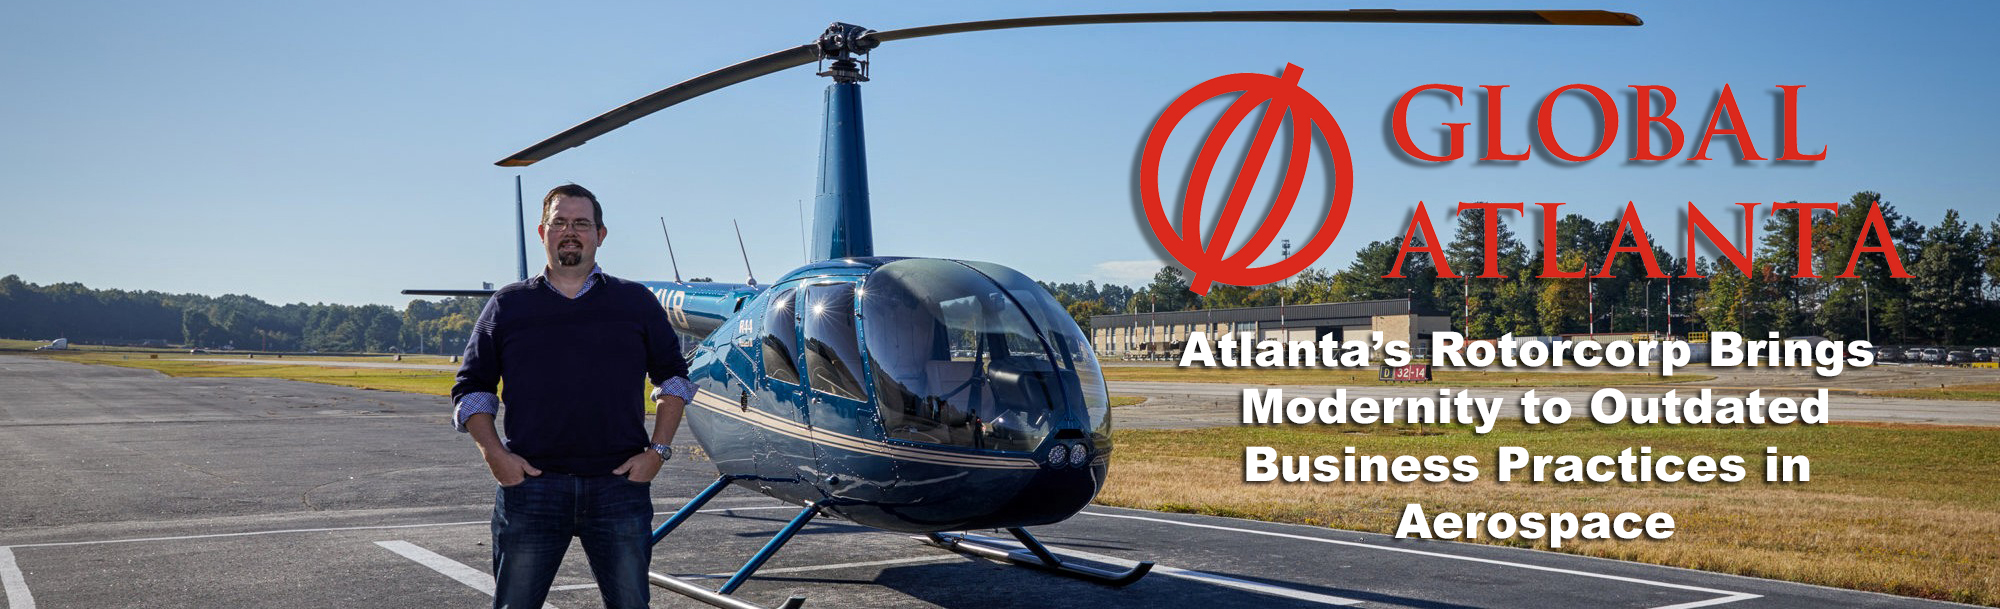 Atlanta’s Rotorcorp Brings Modernity to Outdated Business Practices in Aerospace